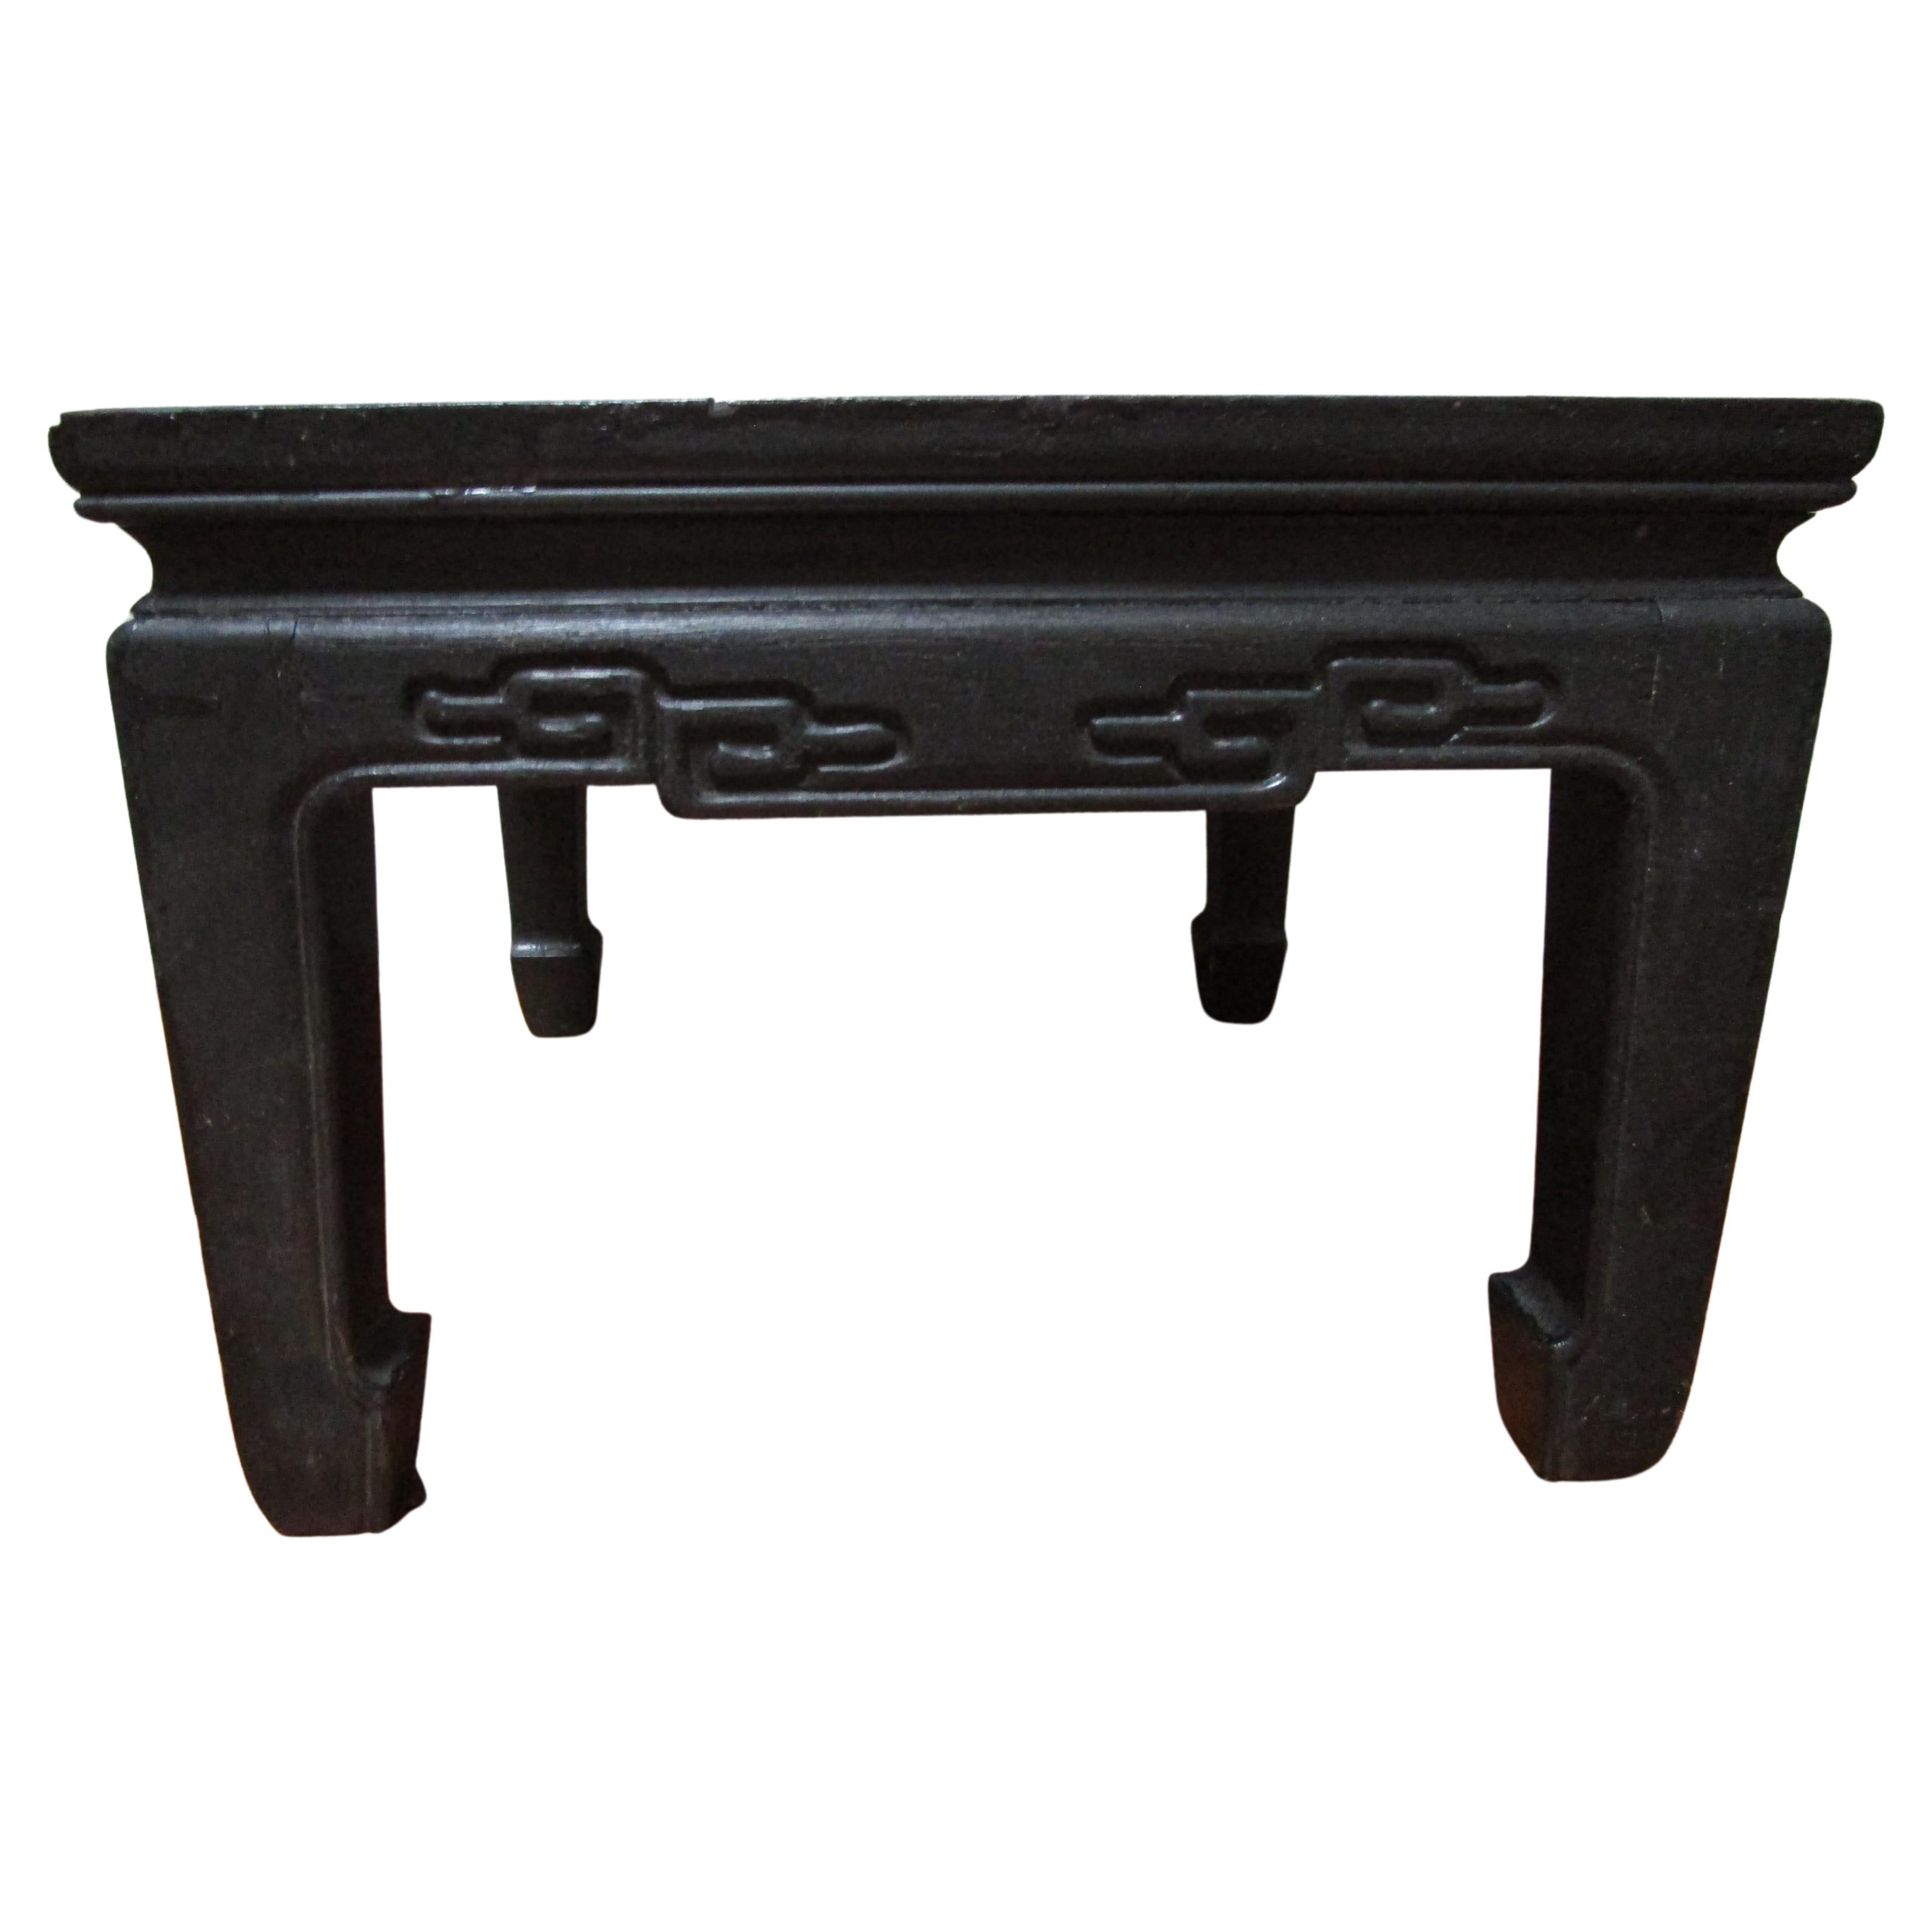 Mid-20th Century Black Wood Foot Rest or Low Side Table with Turned Ming Feet